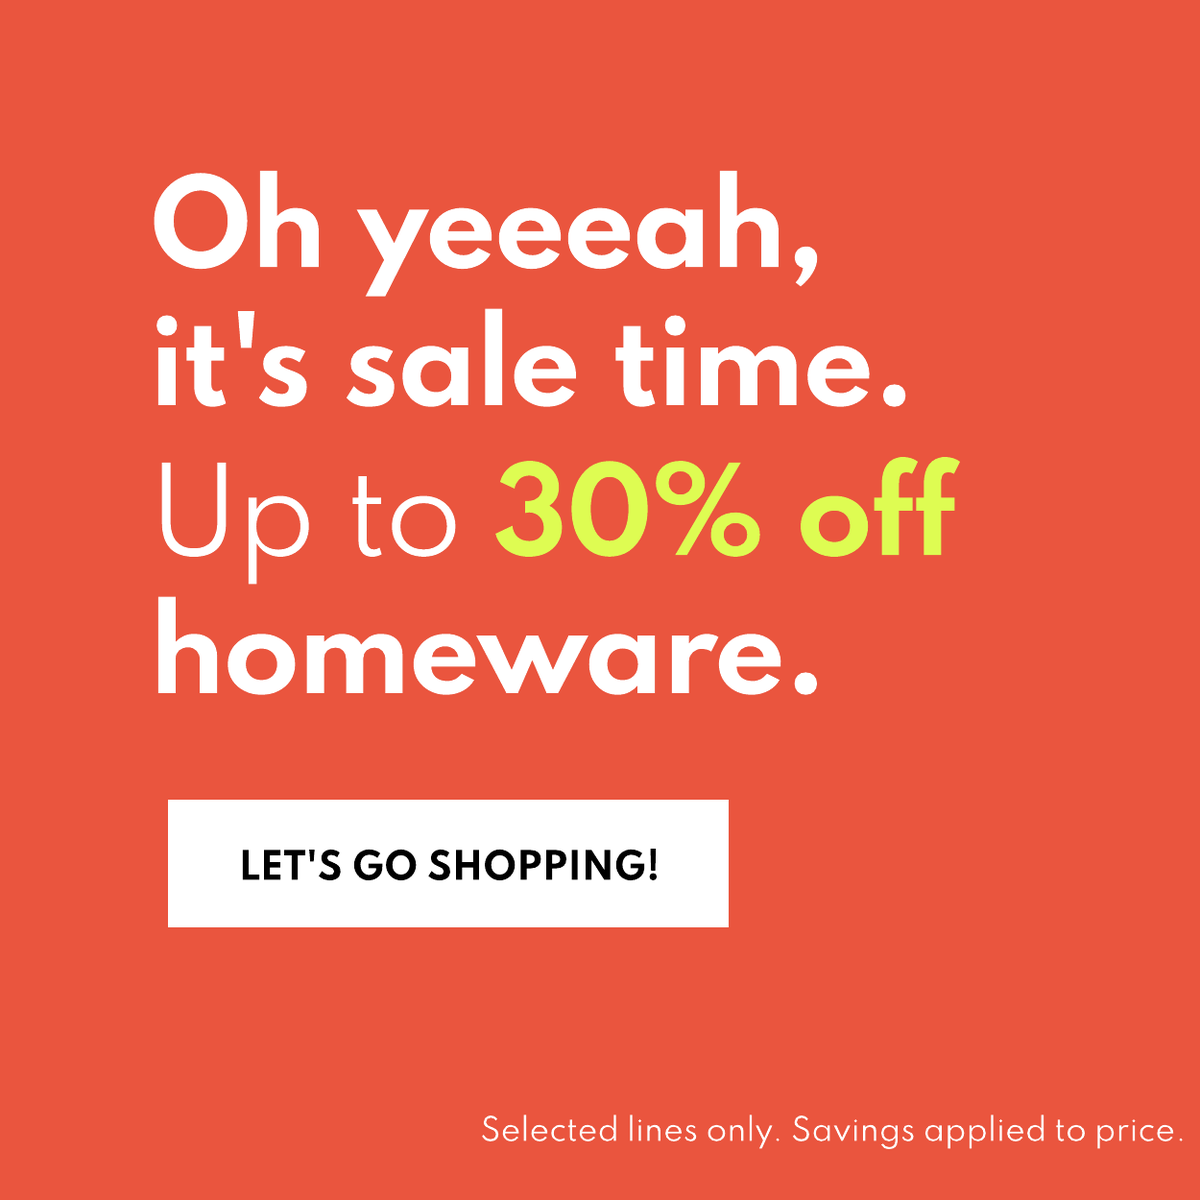 Oh yeeeah, it's sale time. Up to 30% off. Let's go shopping! Selected lines only. Savings applied to price.